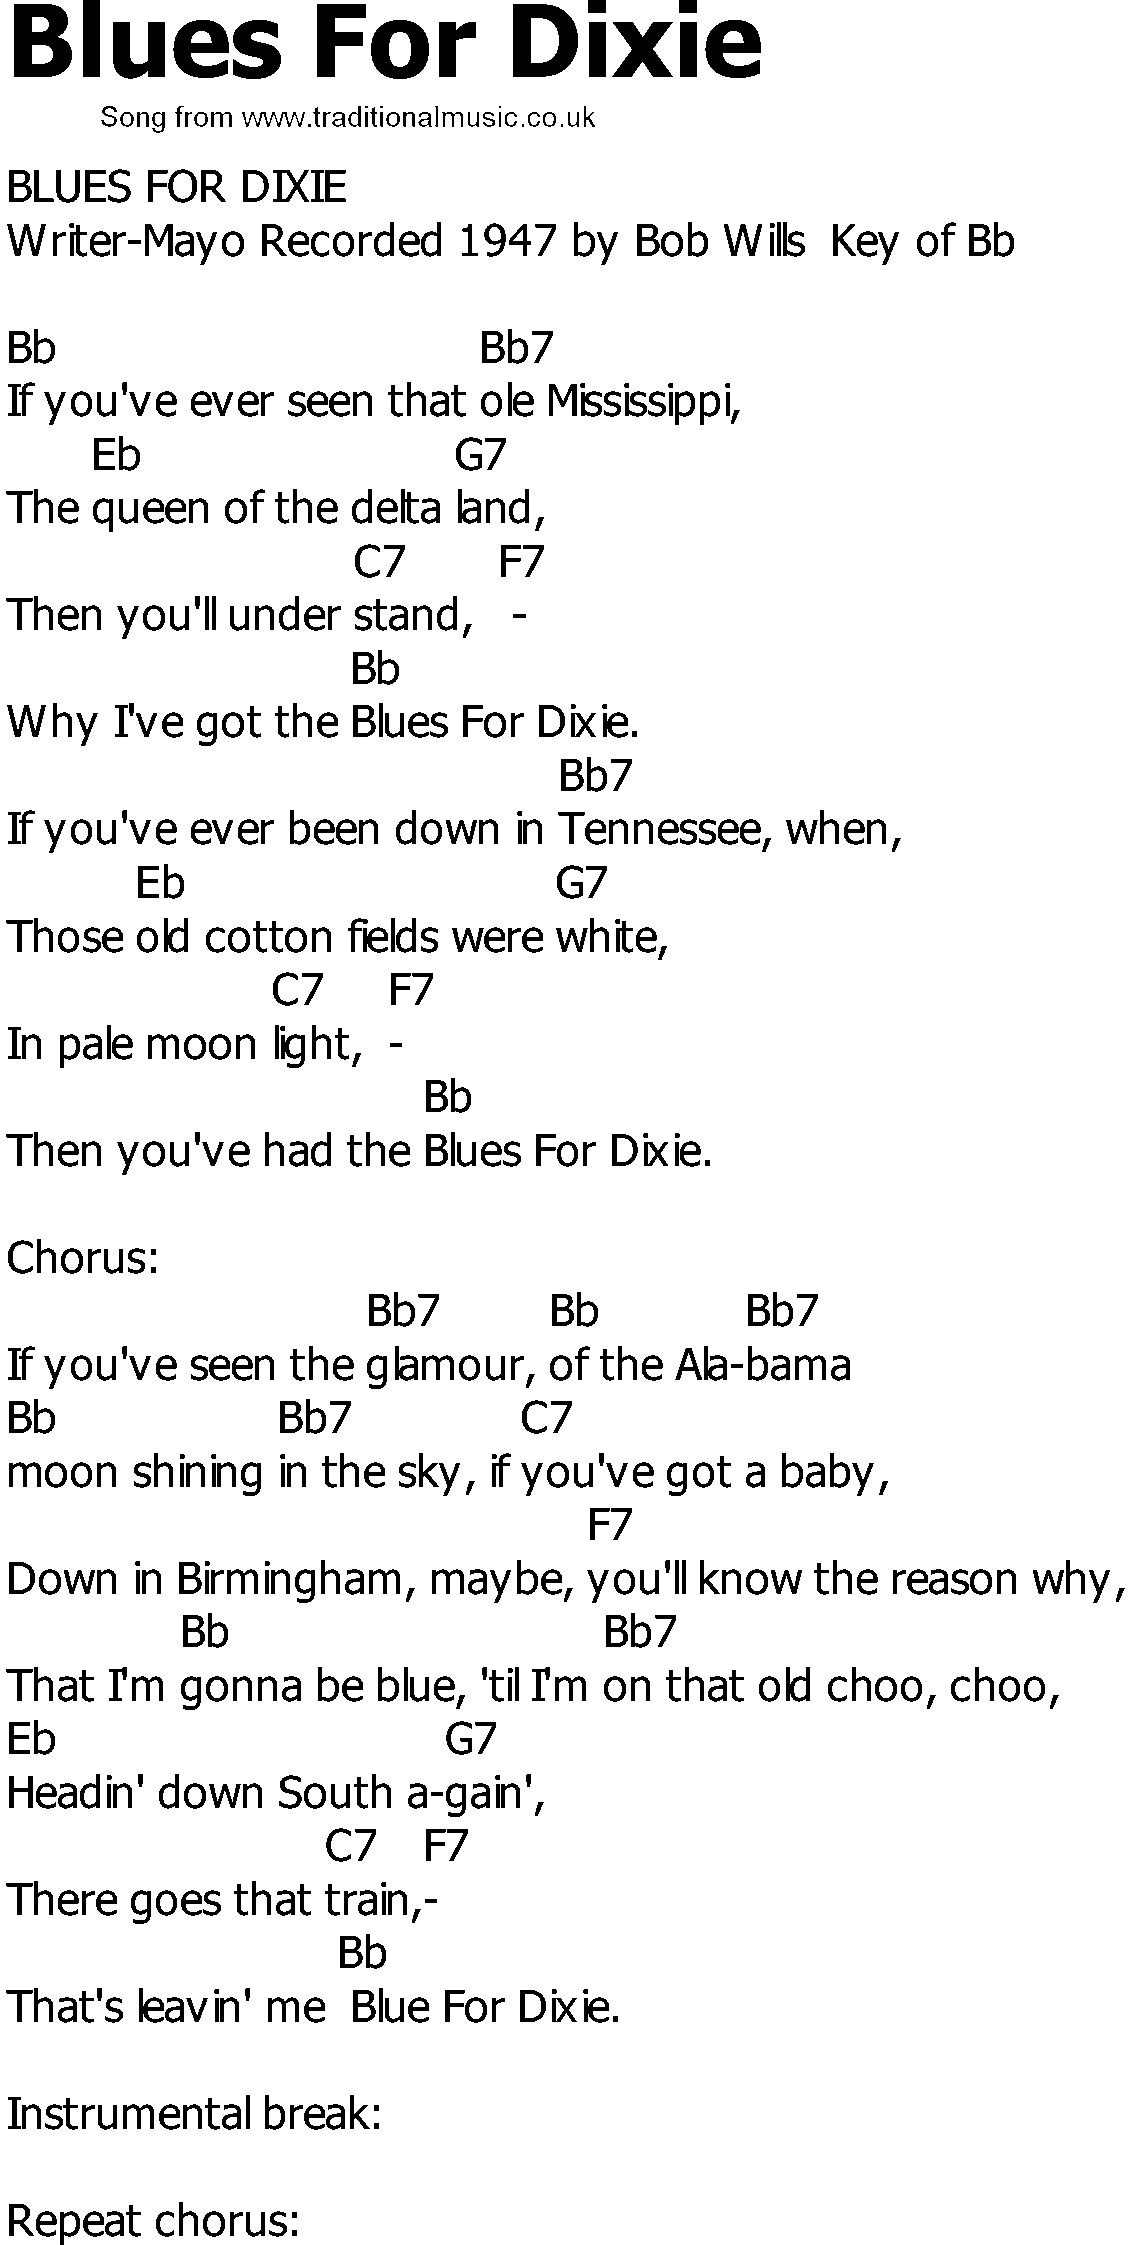 Old Country song lyrics with chords - Blues For Dixie